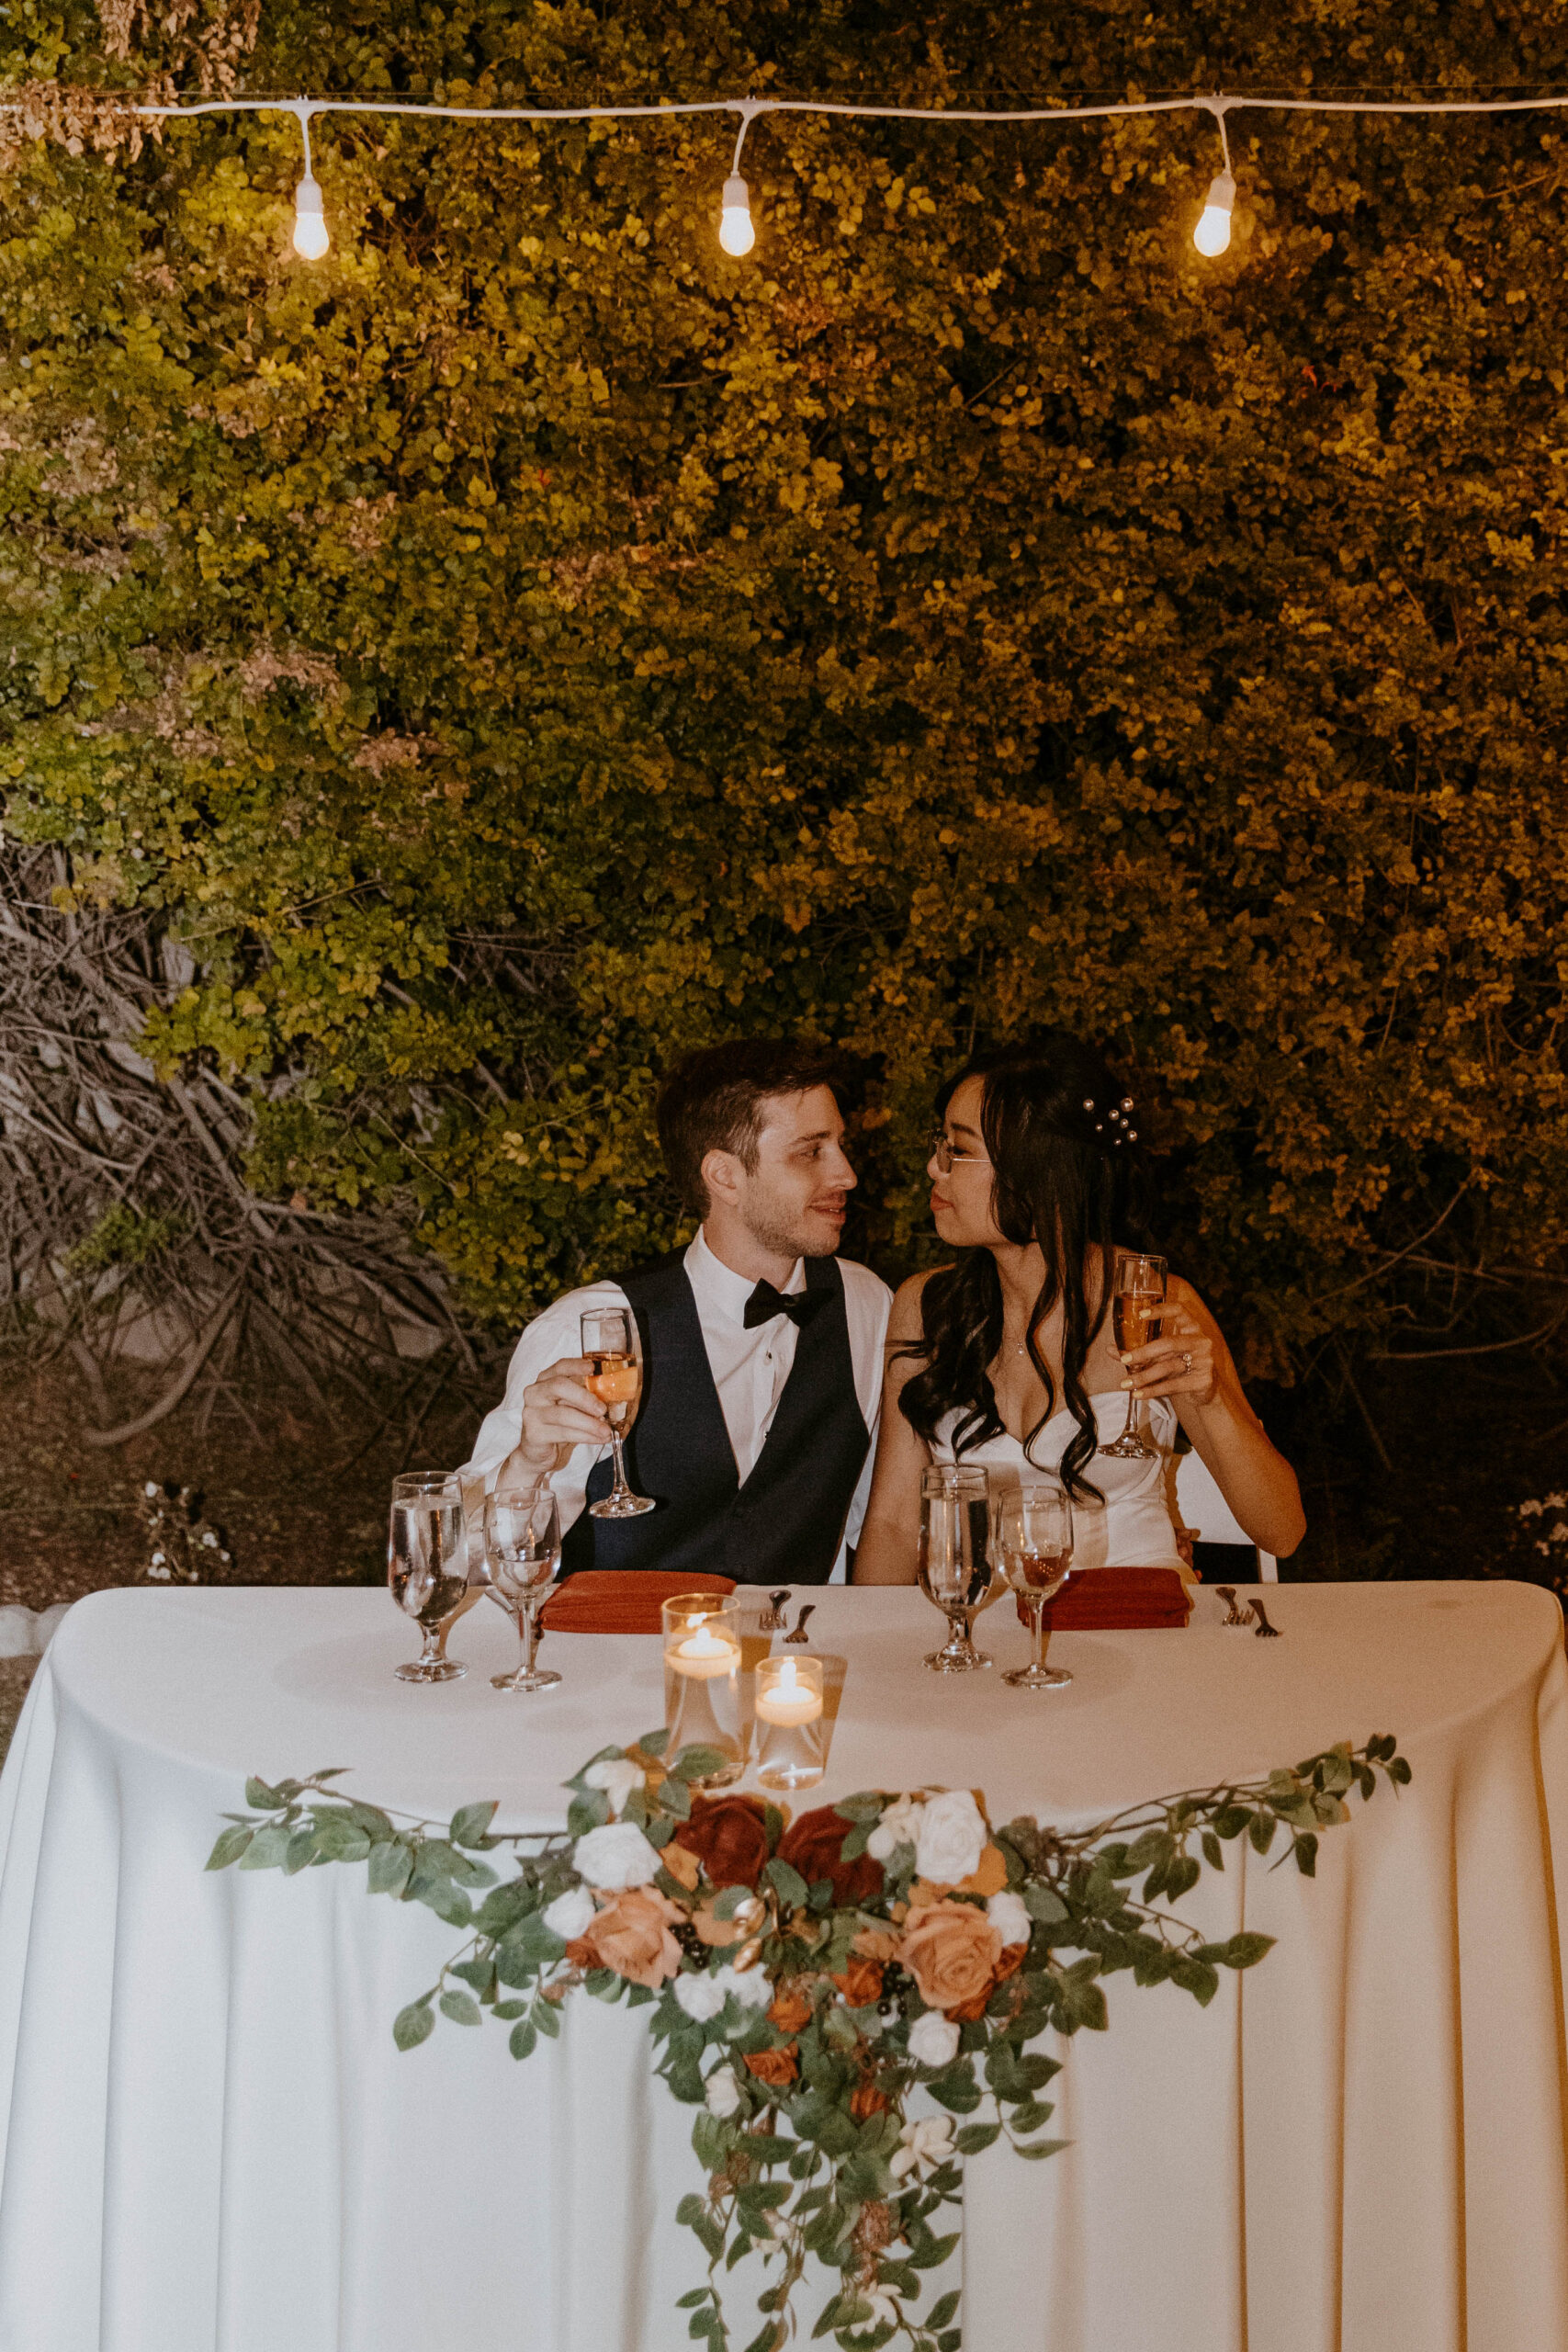 An outdoor wedding gathering with the couple sitting at their head table